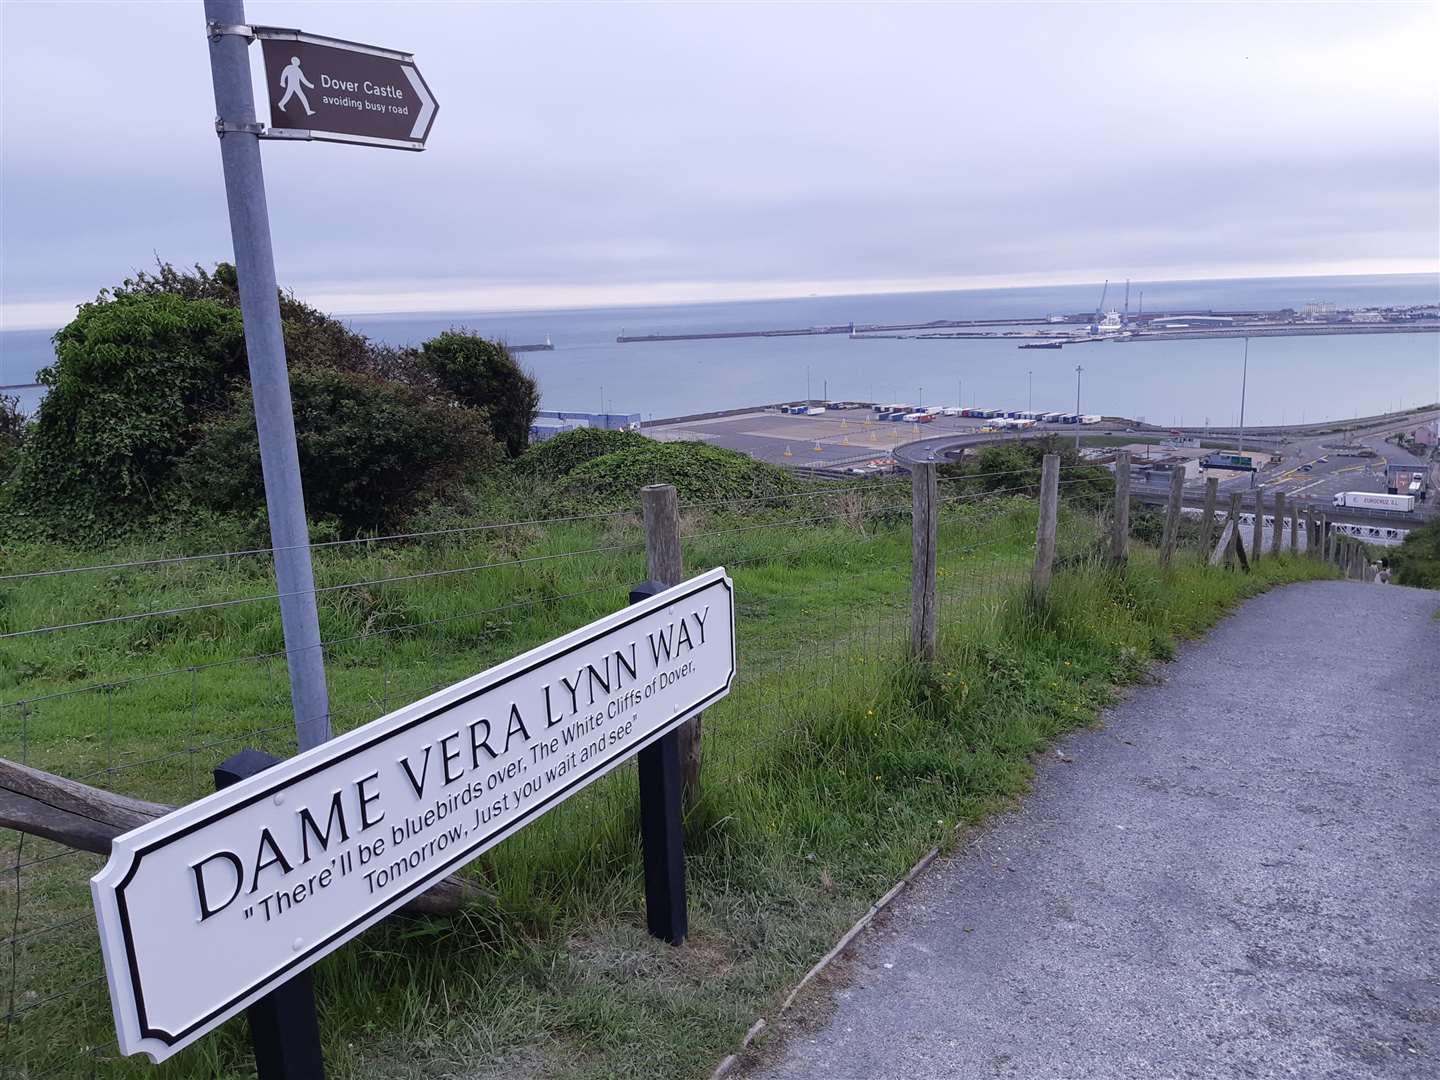 The top of the White Cliffs footpath named after Dame Vera Lynn